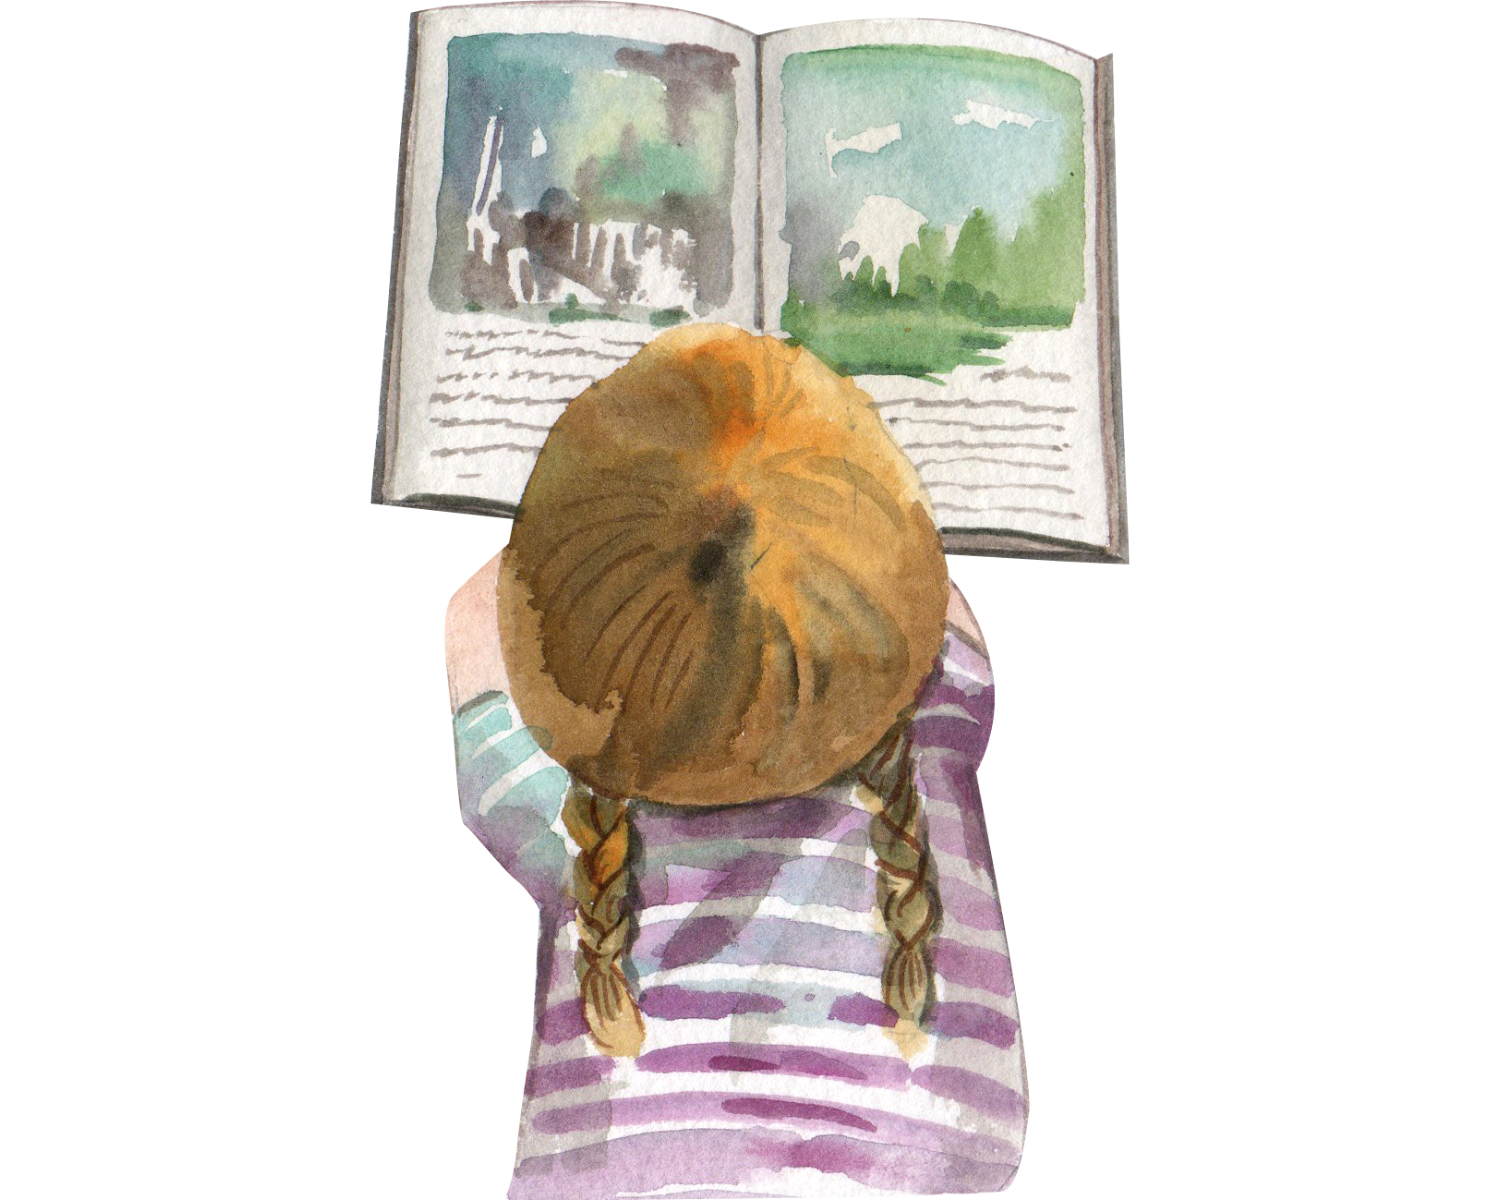 watercolor illustration of a young child reading a picture book